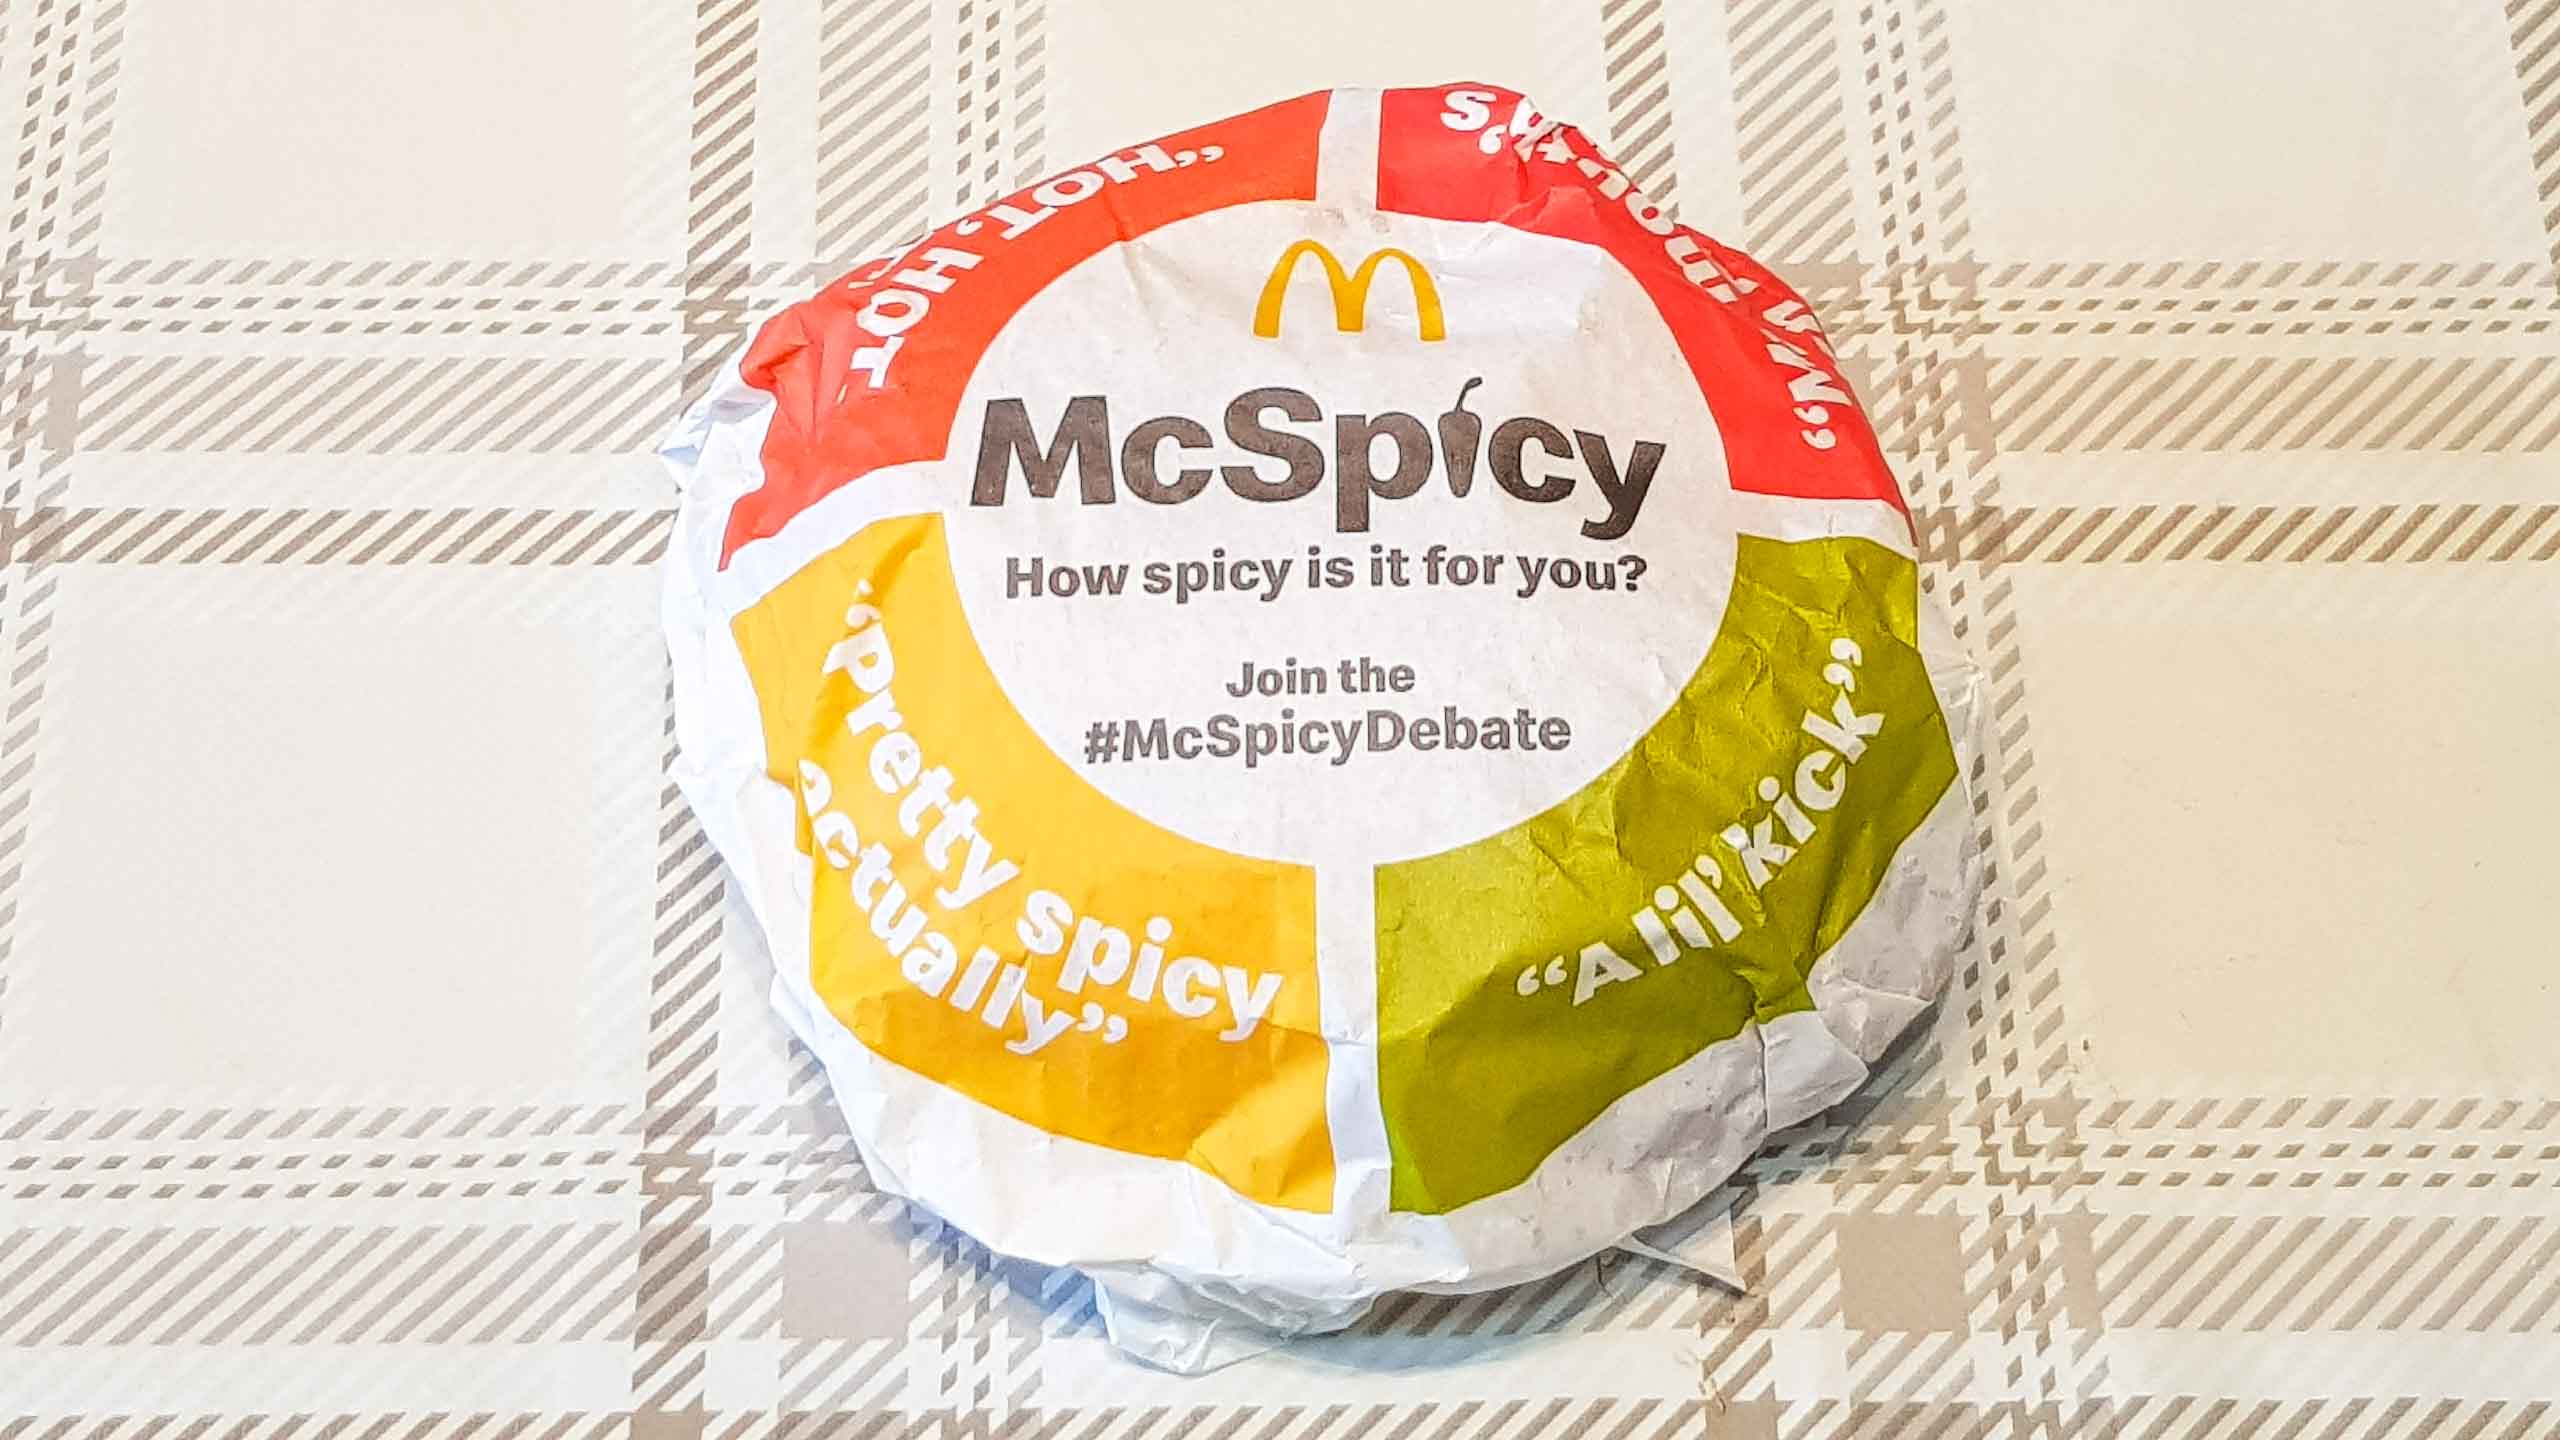 McSpicy burger packaging